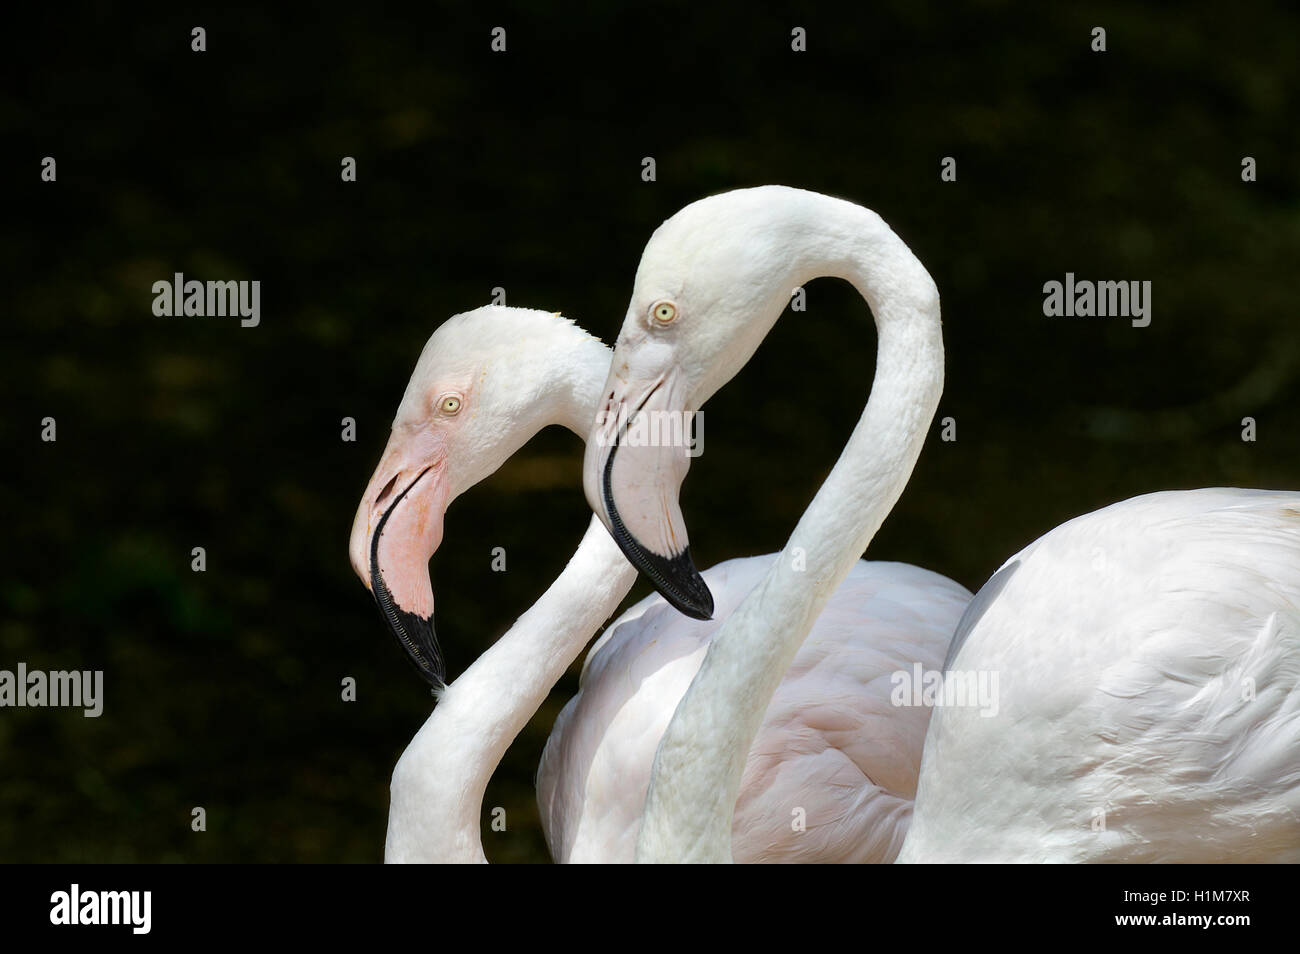 Two adult Flamingoes or Flamingos, Phoenicopterus, pose side by side. Stock Photo